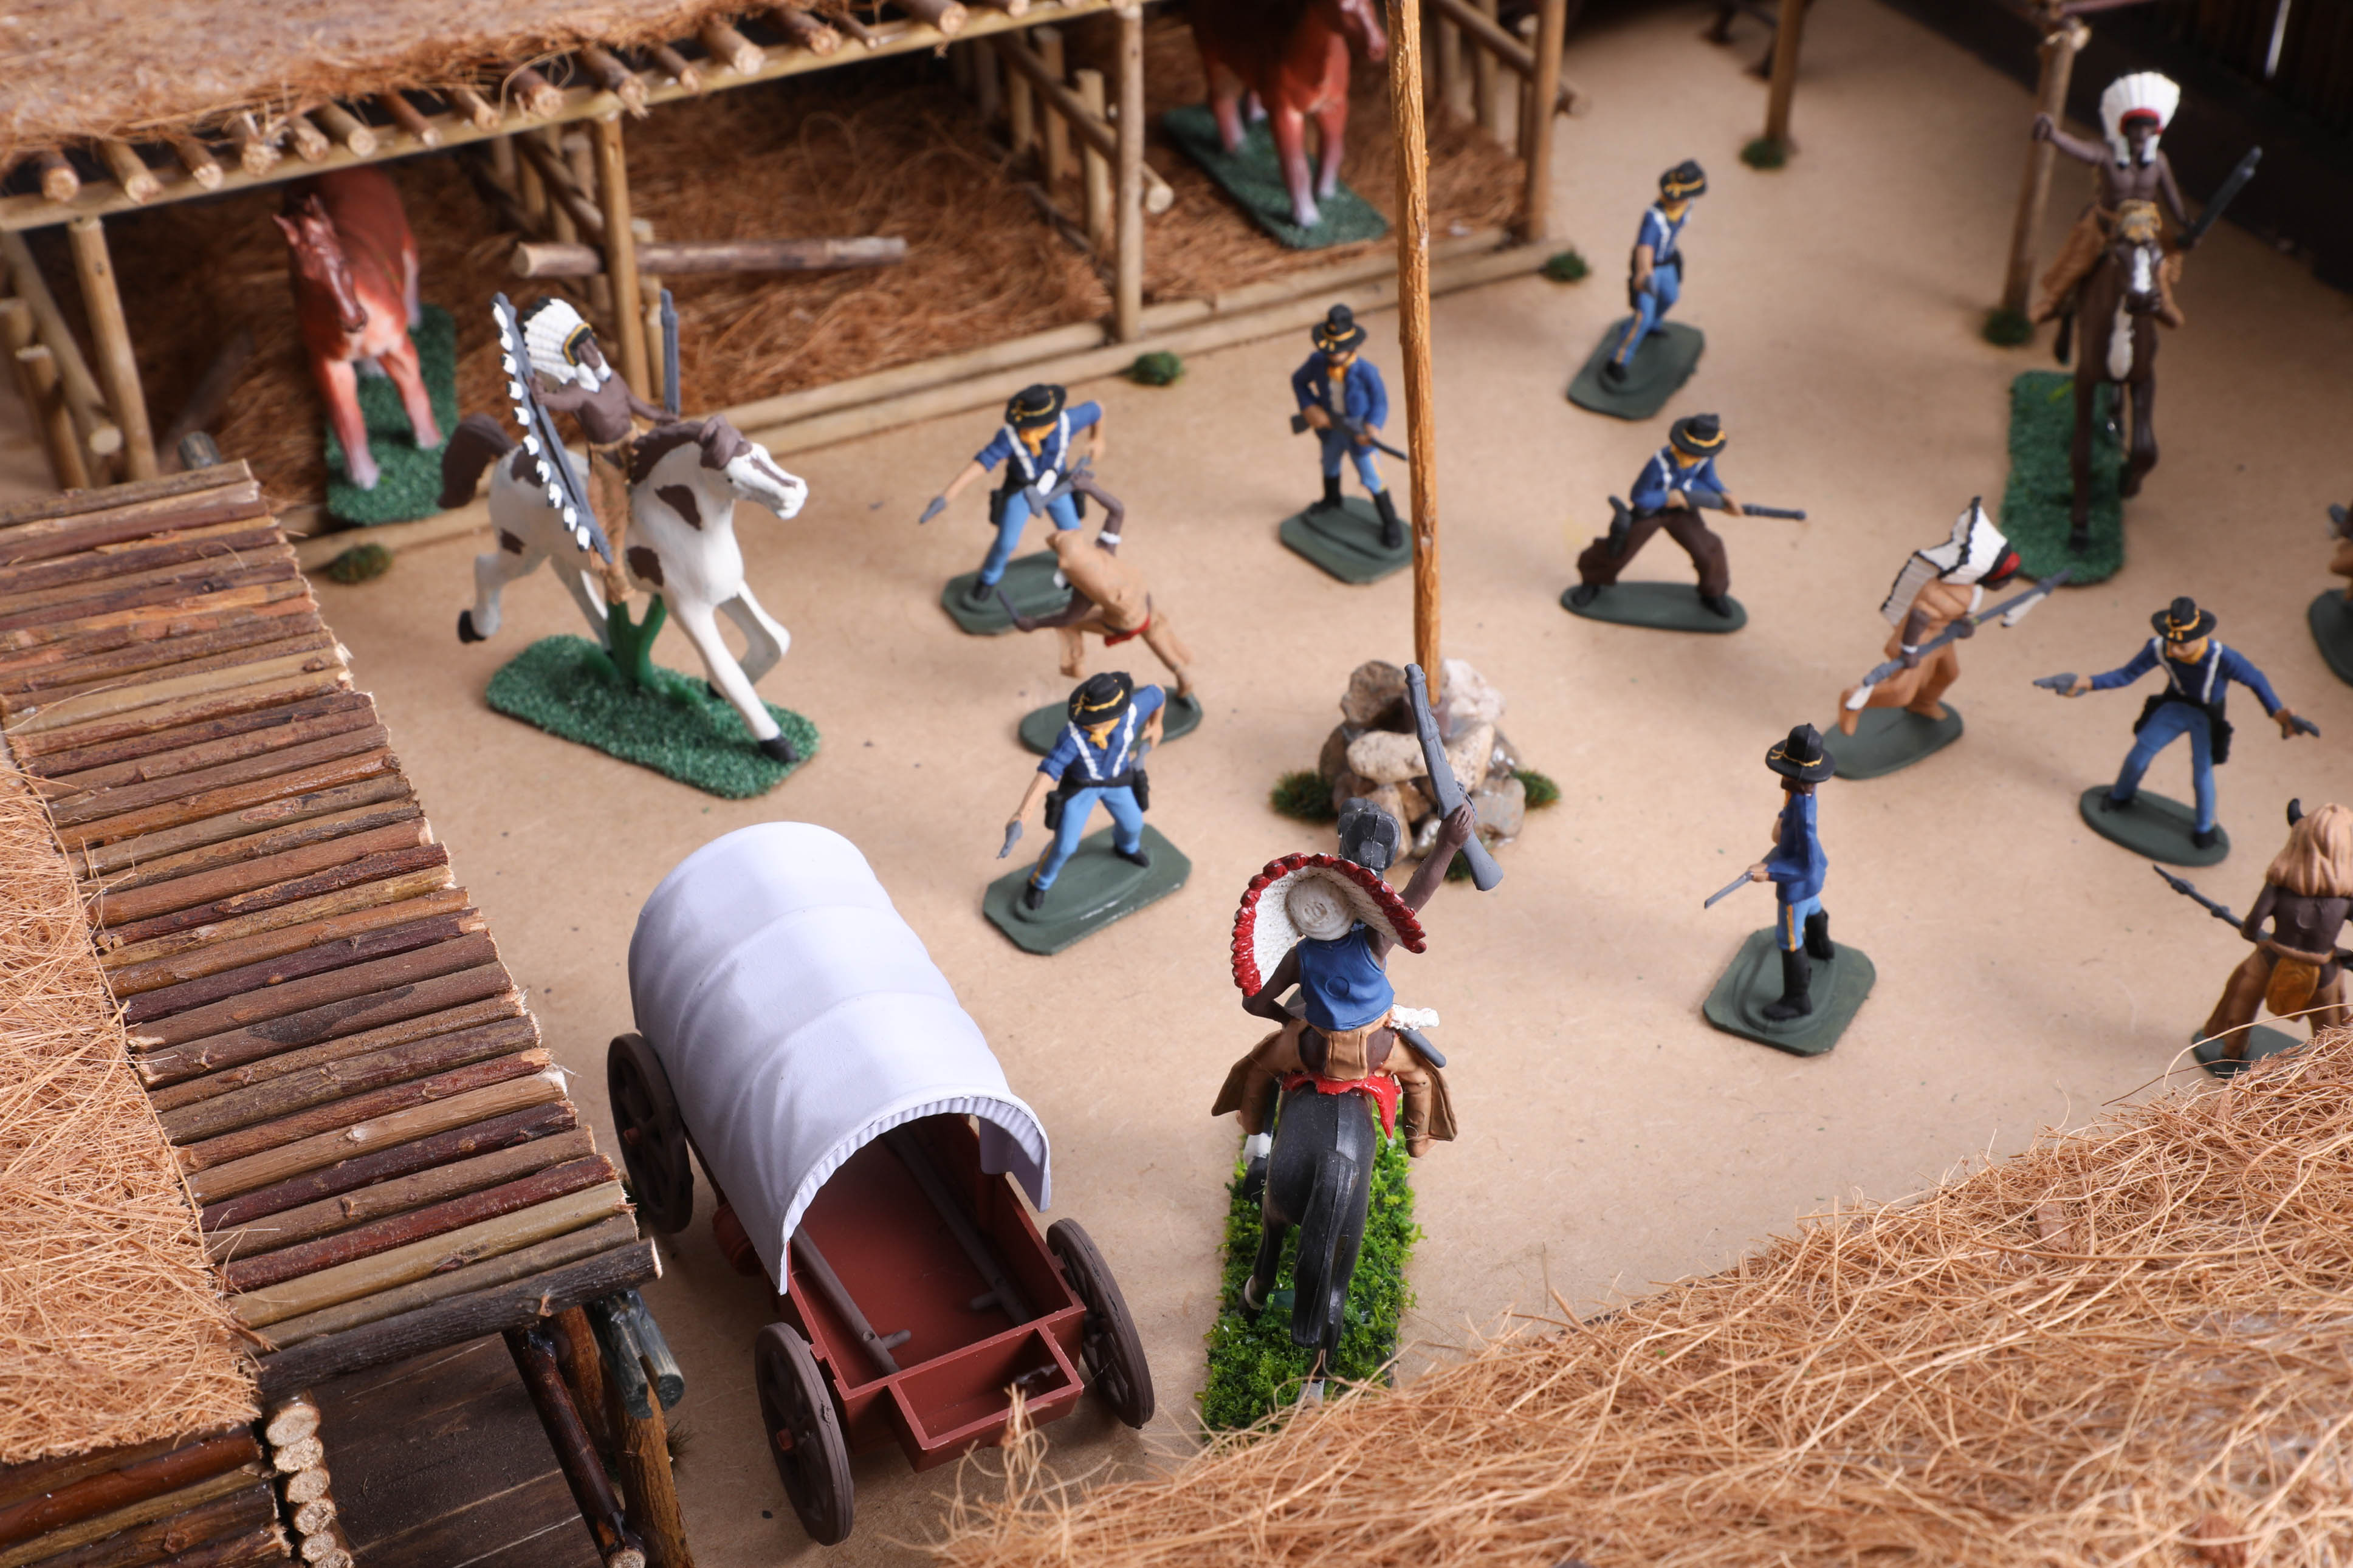 Handmade fort for Cavalry and Indians including figures.